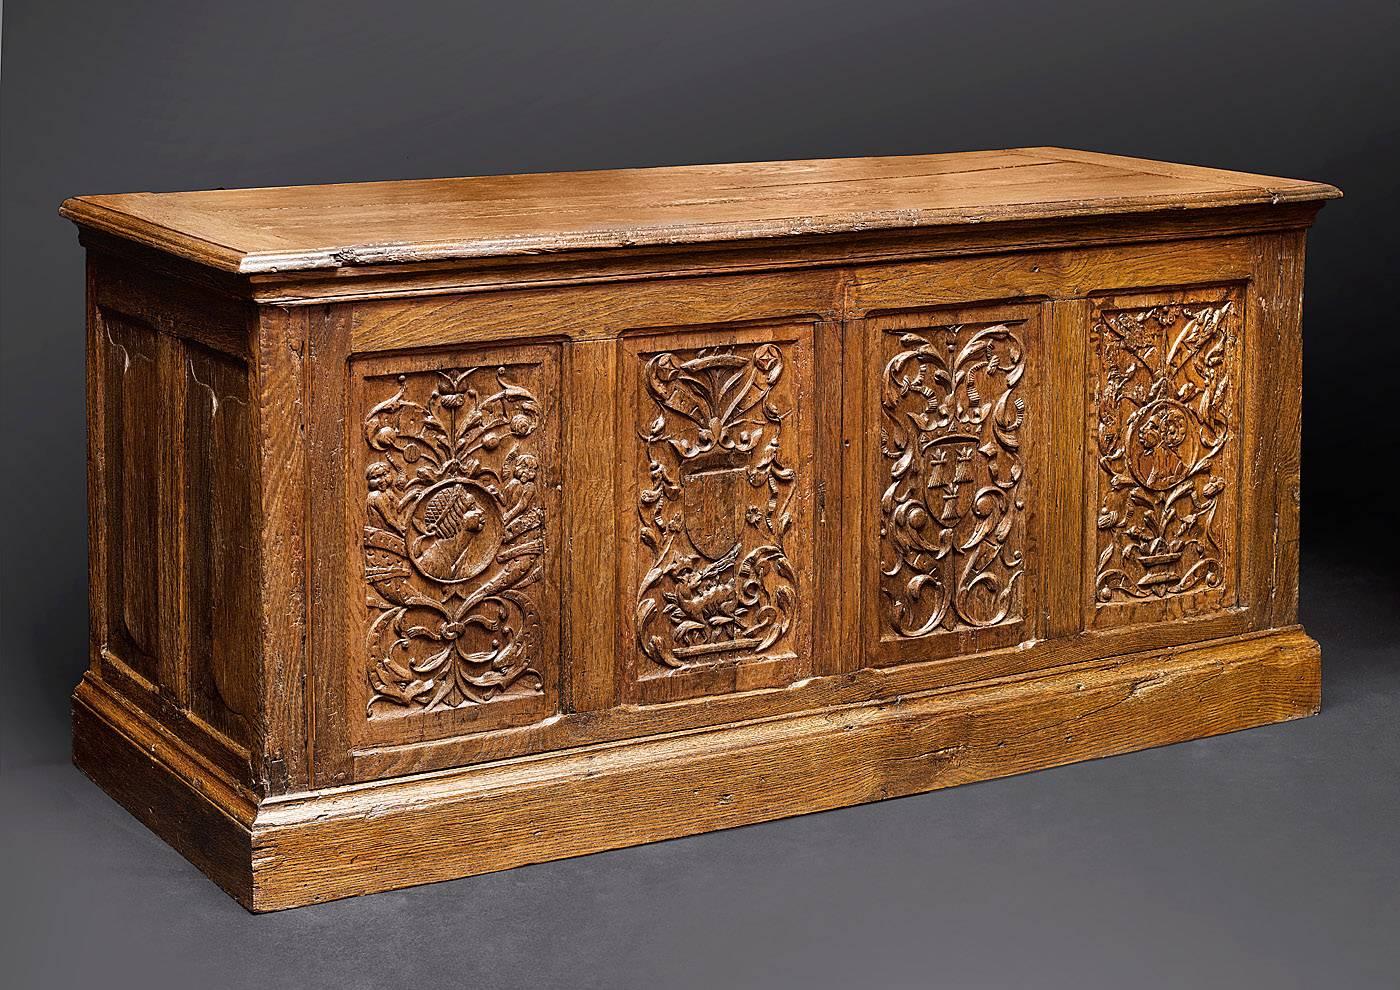 ORIGIN: FRANCE
EPOQUE: 16th CENTURY

Height : 80 cm
Length : 165 cm
Depth : 66 cm

Oak

This chest presents on its sides a medieval decor while the facade figures some carved "Grotesques". These designs appeared in Italy during the